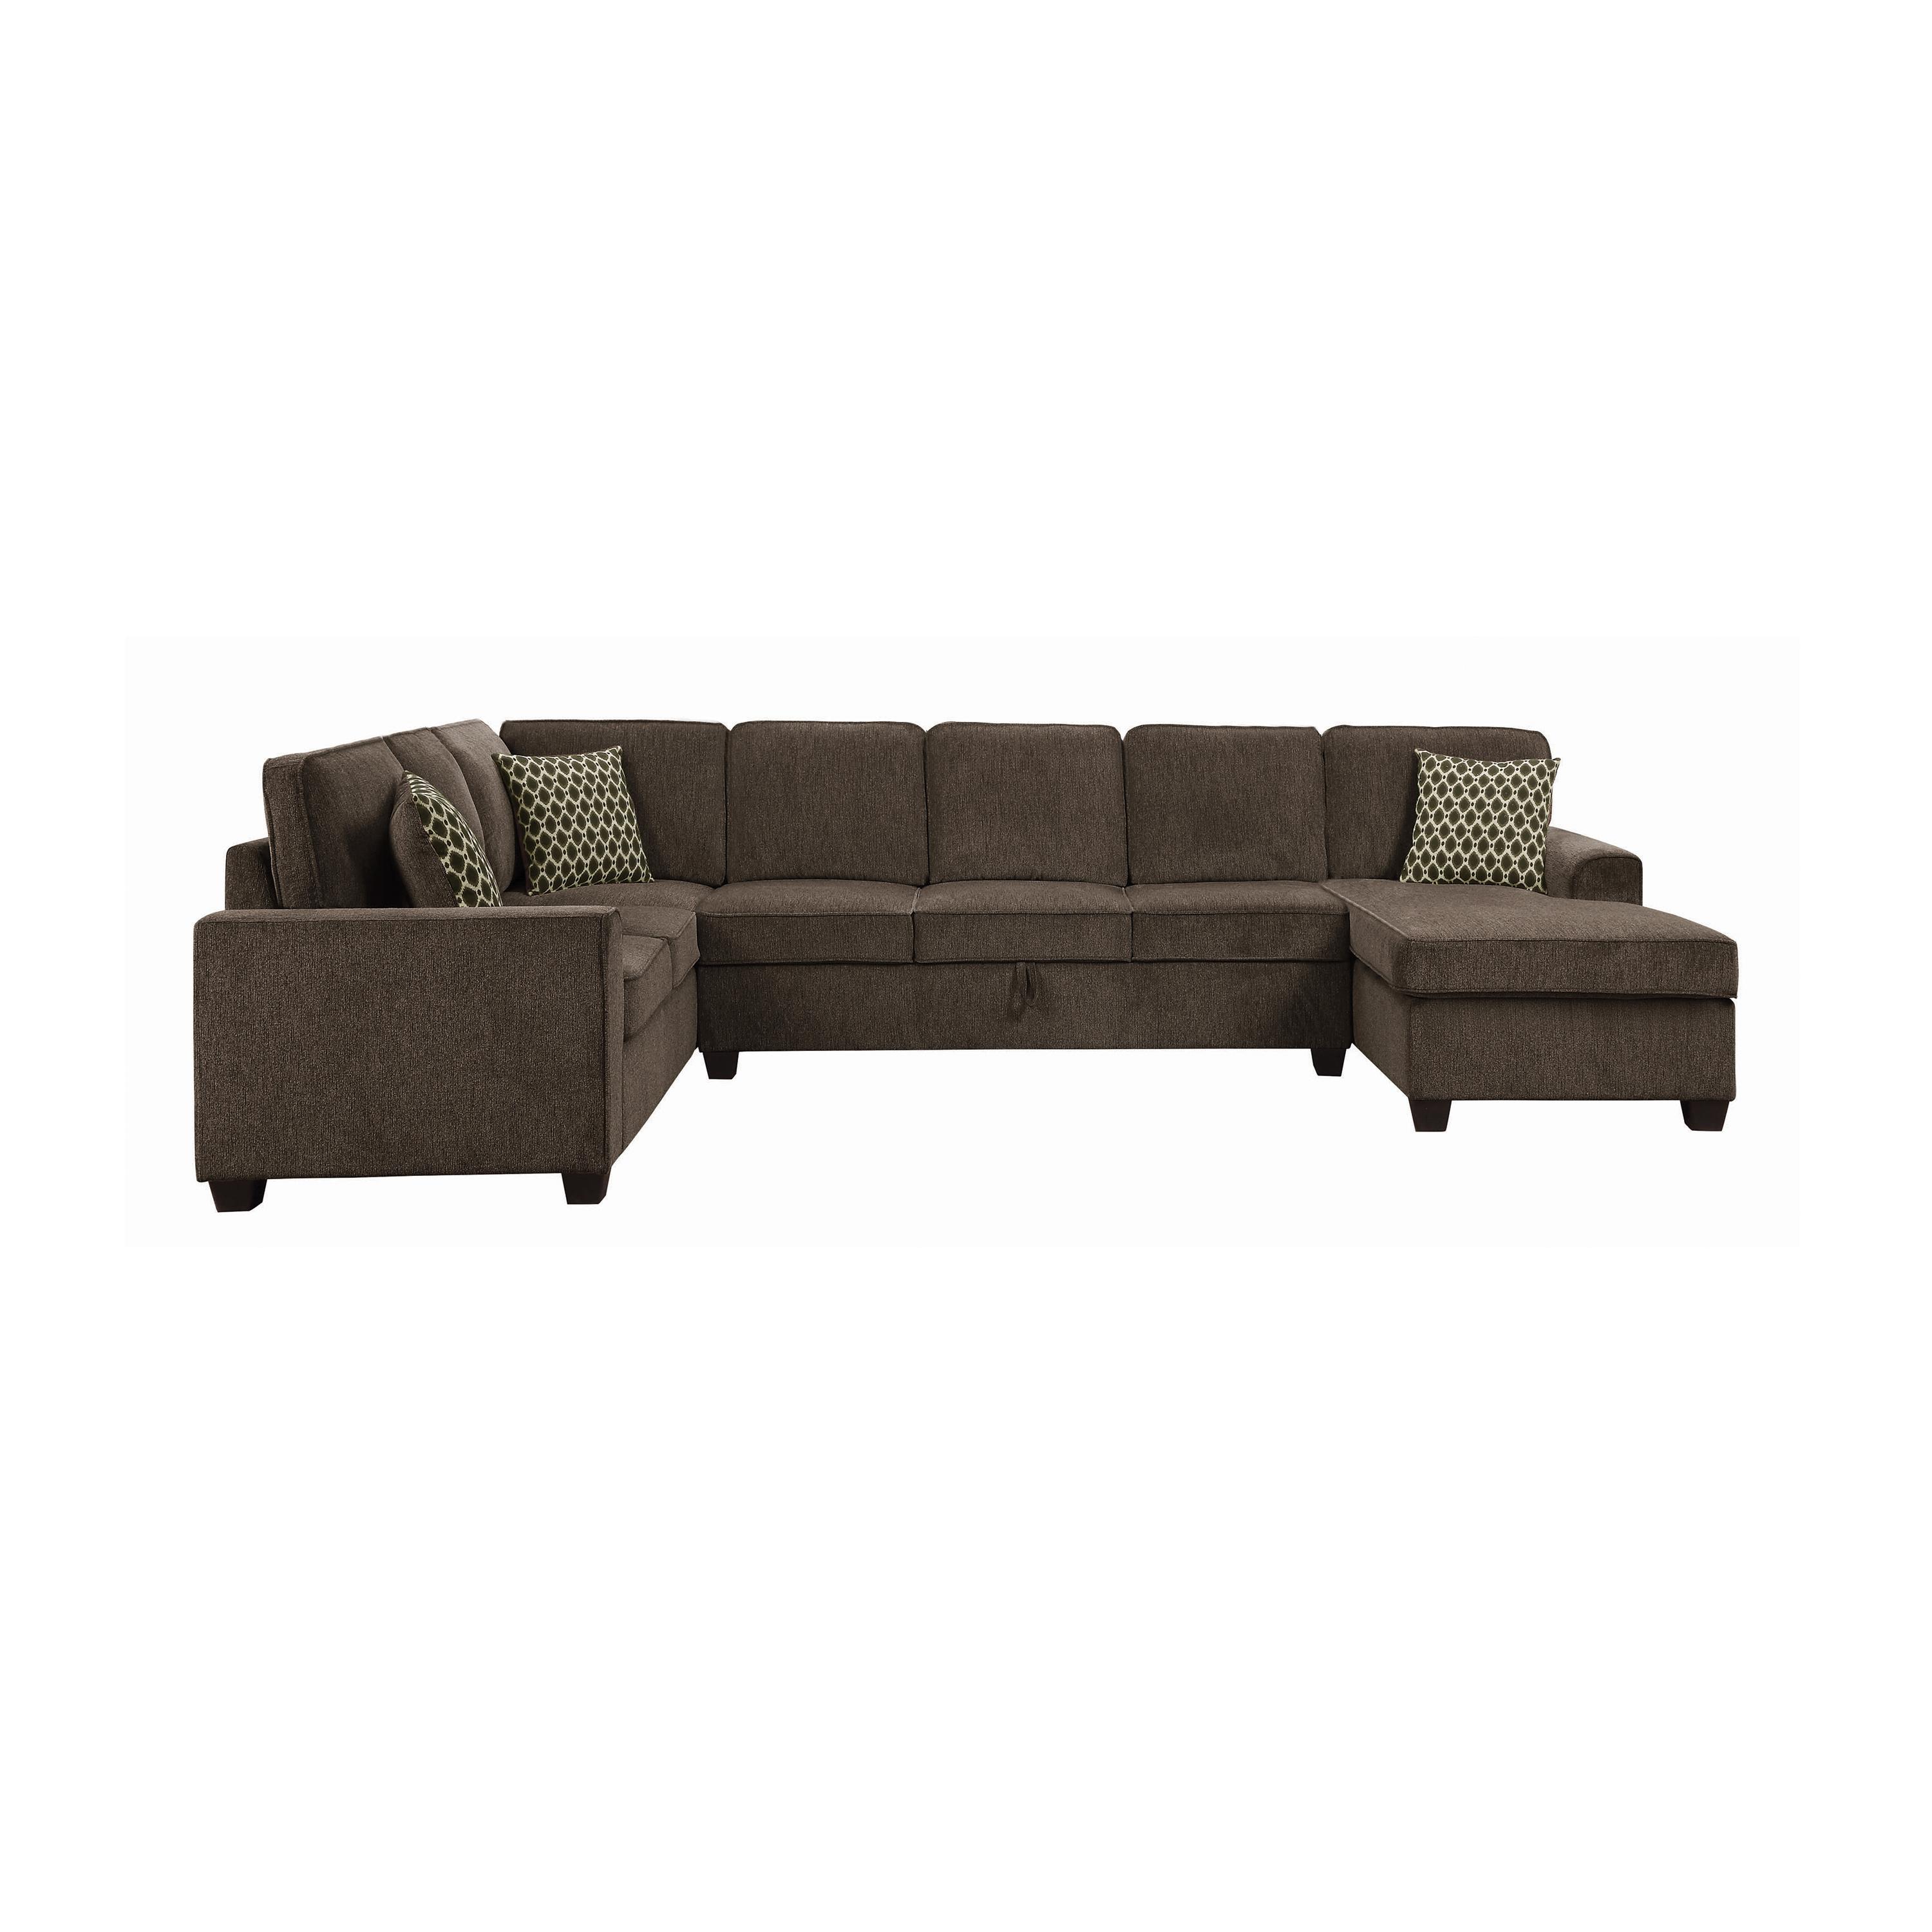 Modern Sectional 501686 Provence 501686 in Brown Chenille